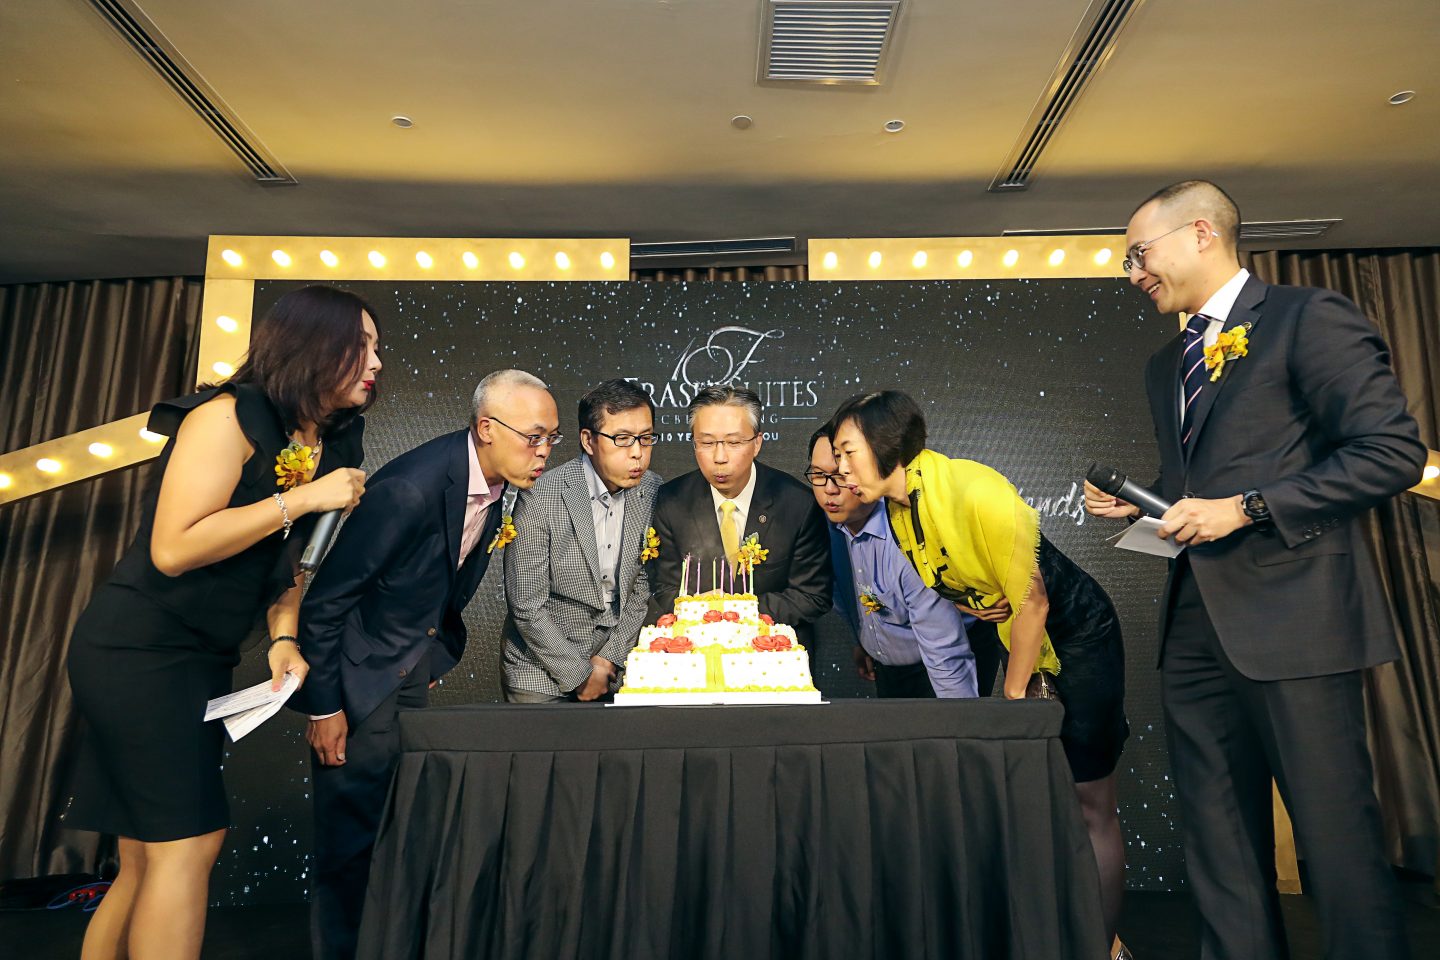 “Many times at work, it's how we behave, how we react in difficult situations that will convince someone that God is alive, Choe shares. He is seen here celebrating Fraser Suites Beijing's 10th anniversary, 2018.